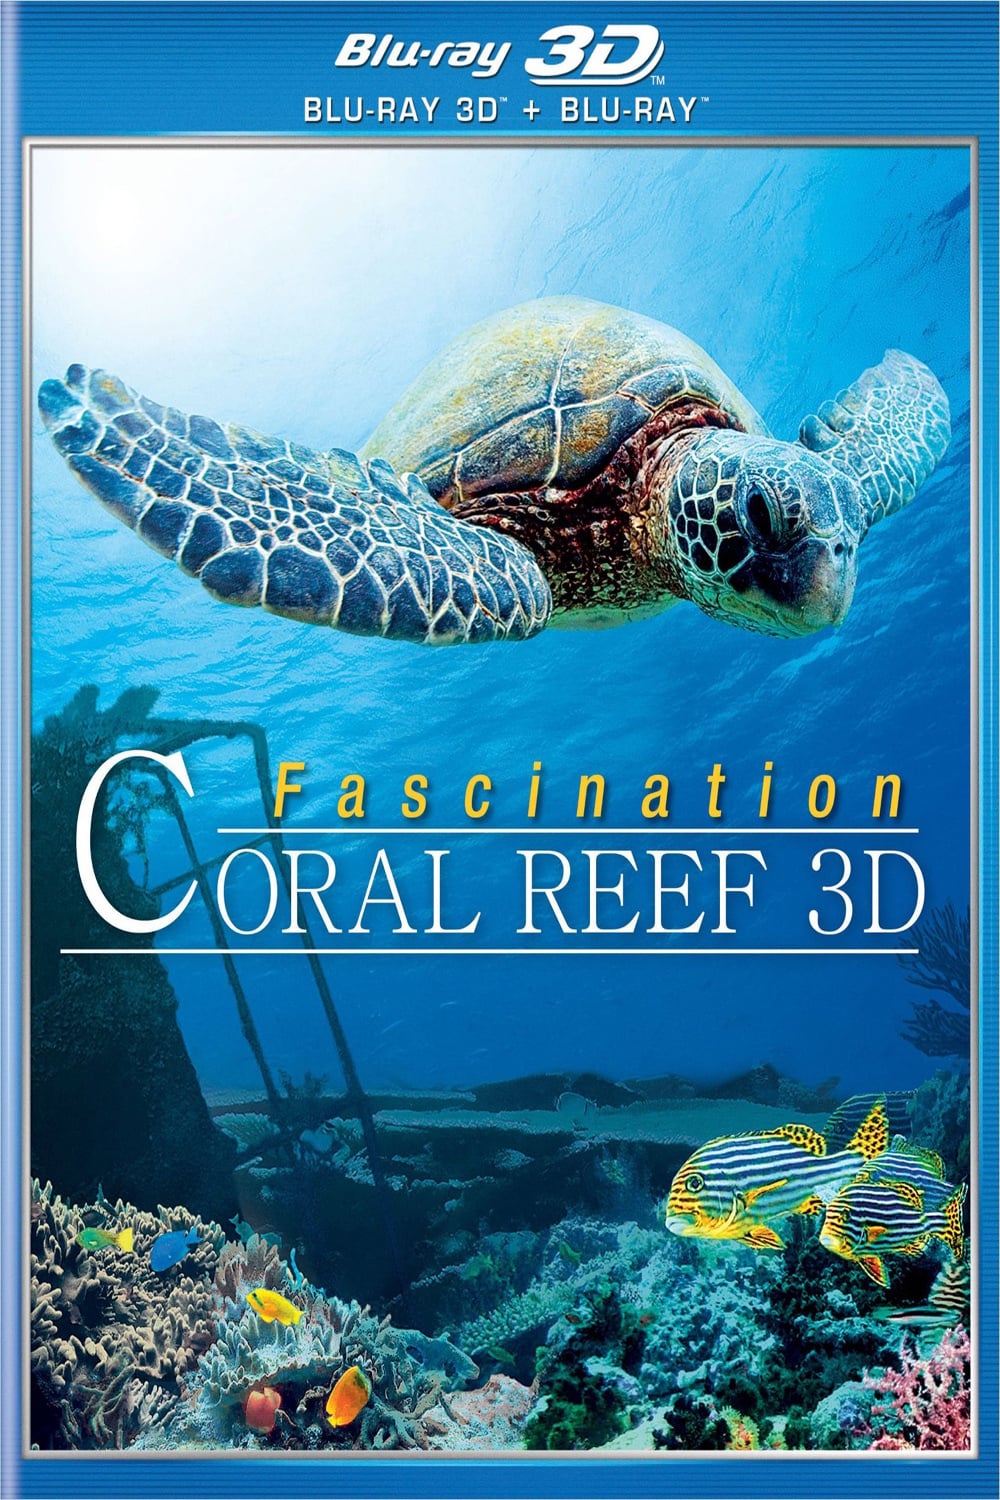 Fascination Coral Reef: Mysterious Worlds Underwater